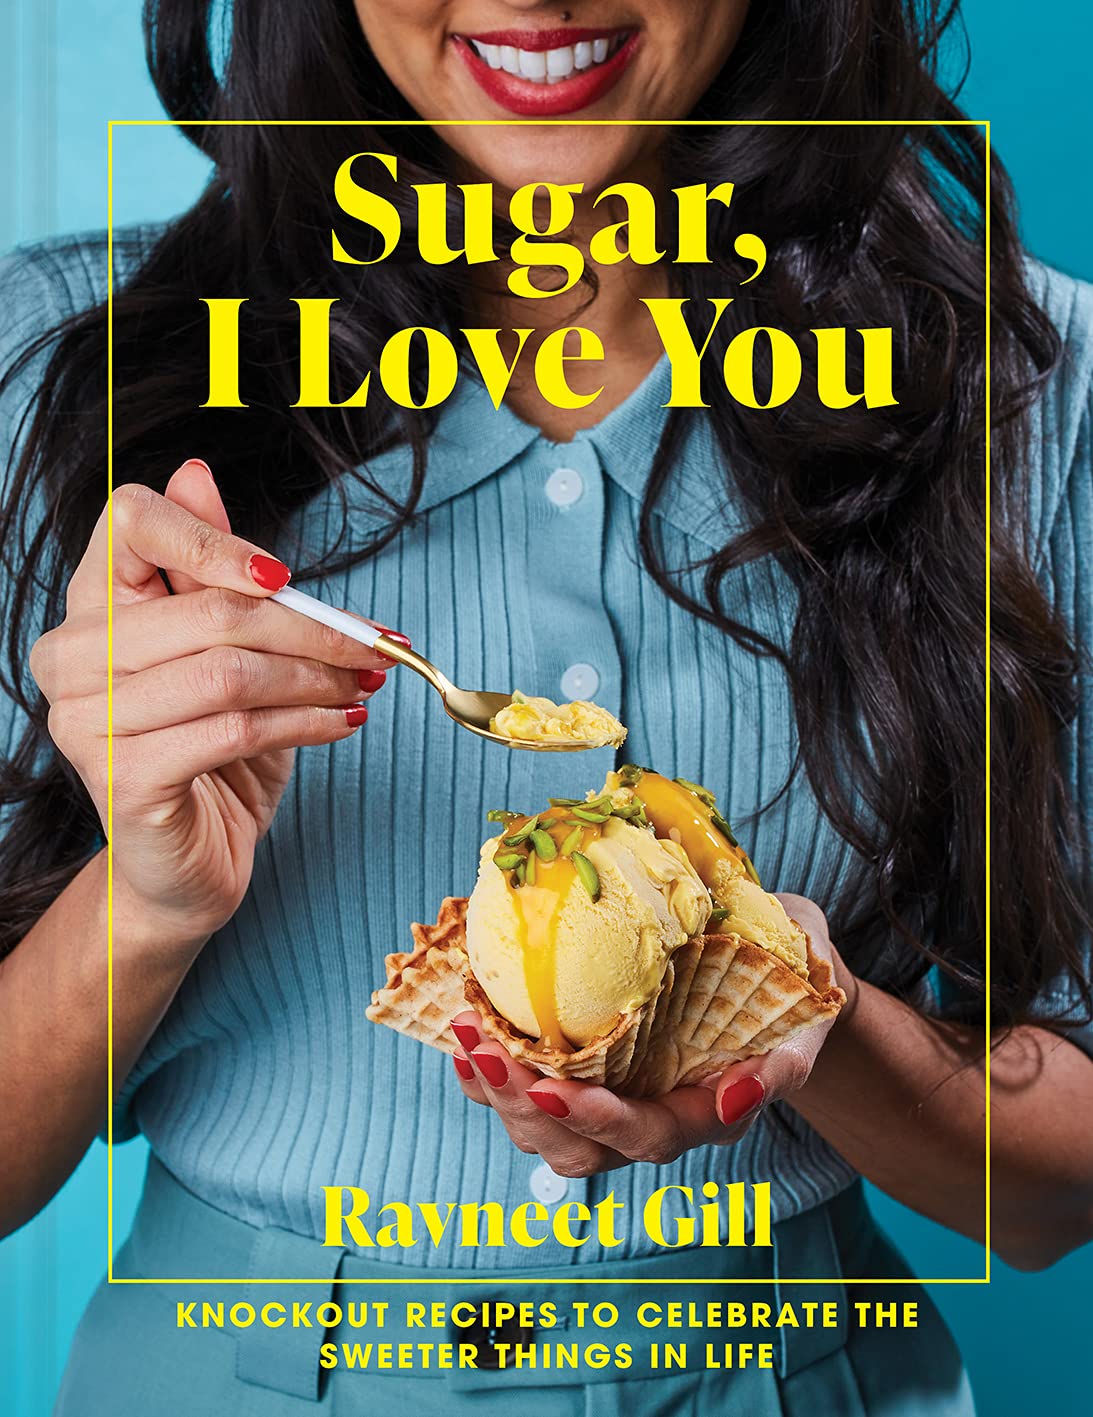 Sugar, I Love You : Knockout recipes to celebrate the sweeter things in life (Hardcover)